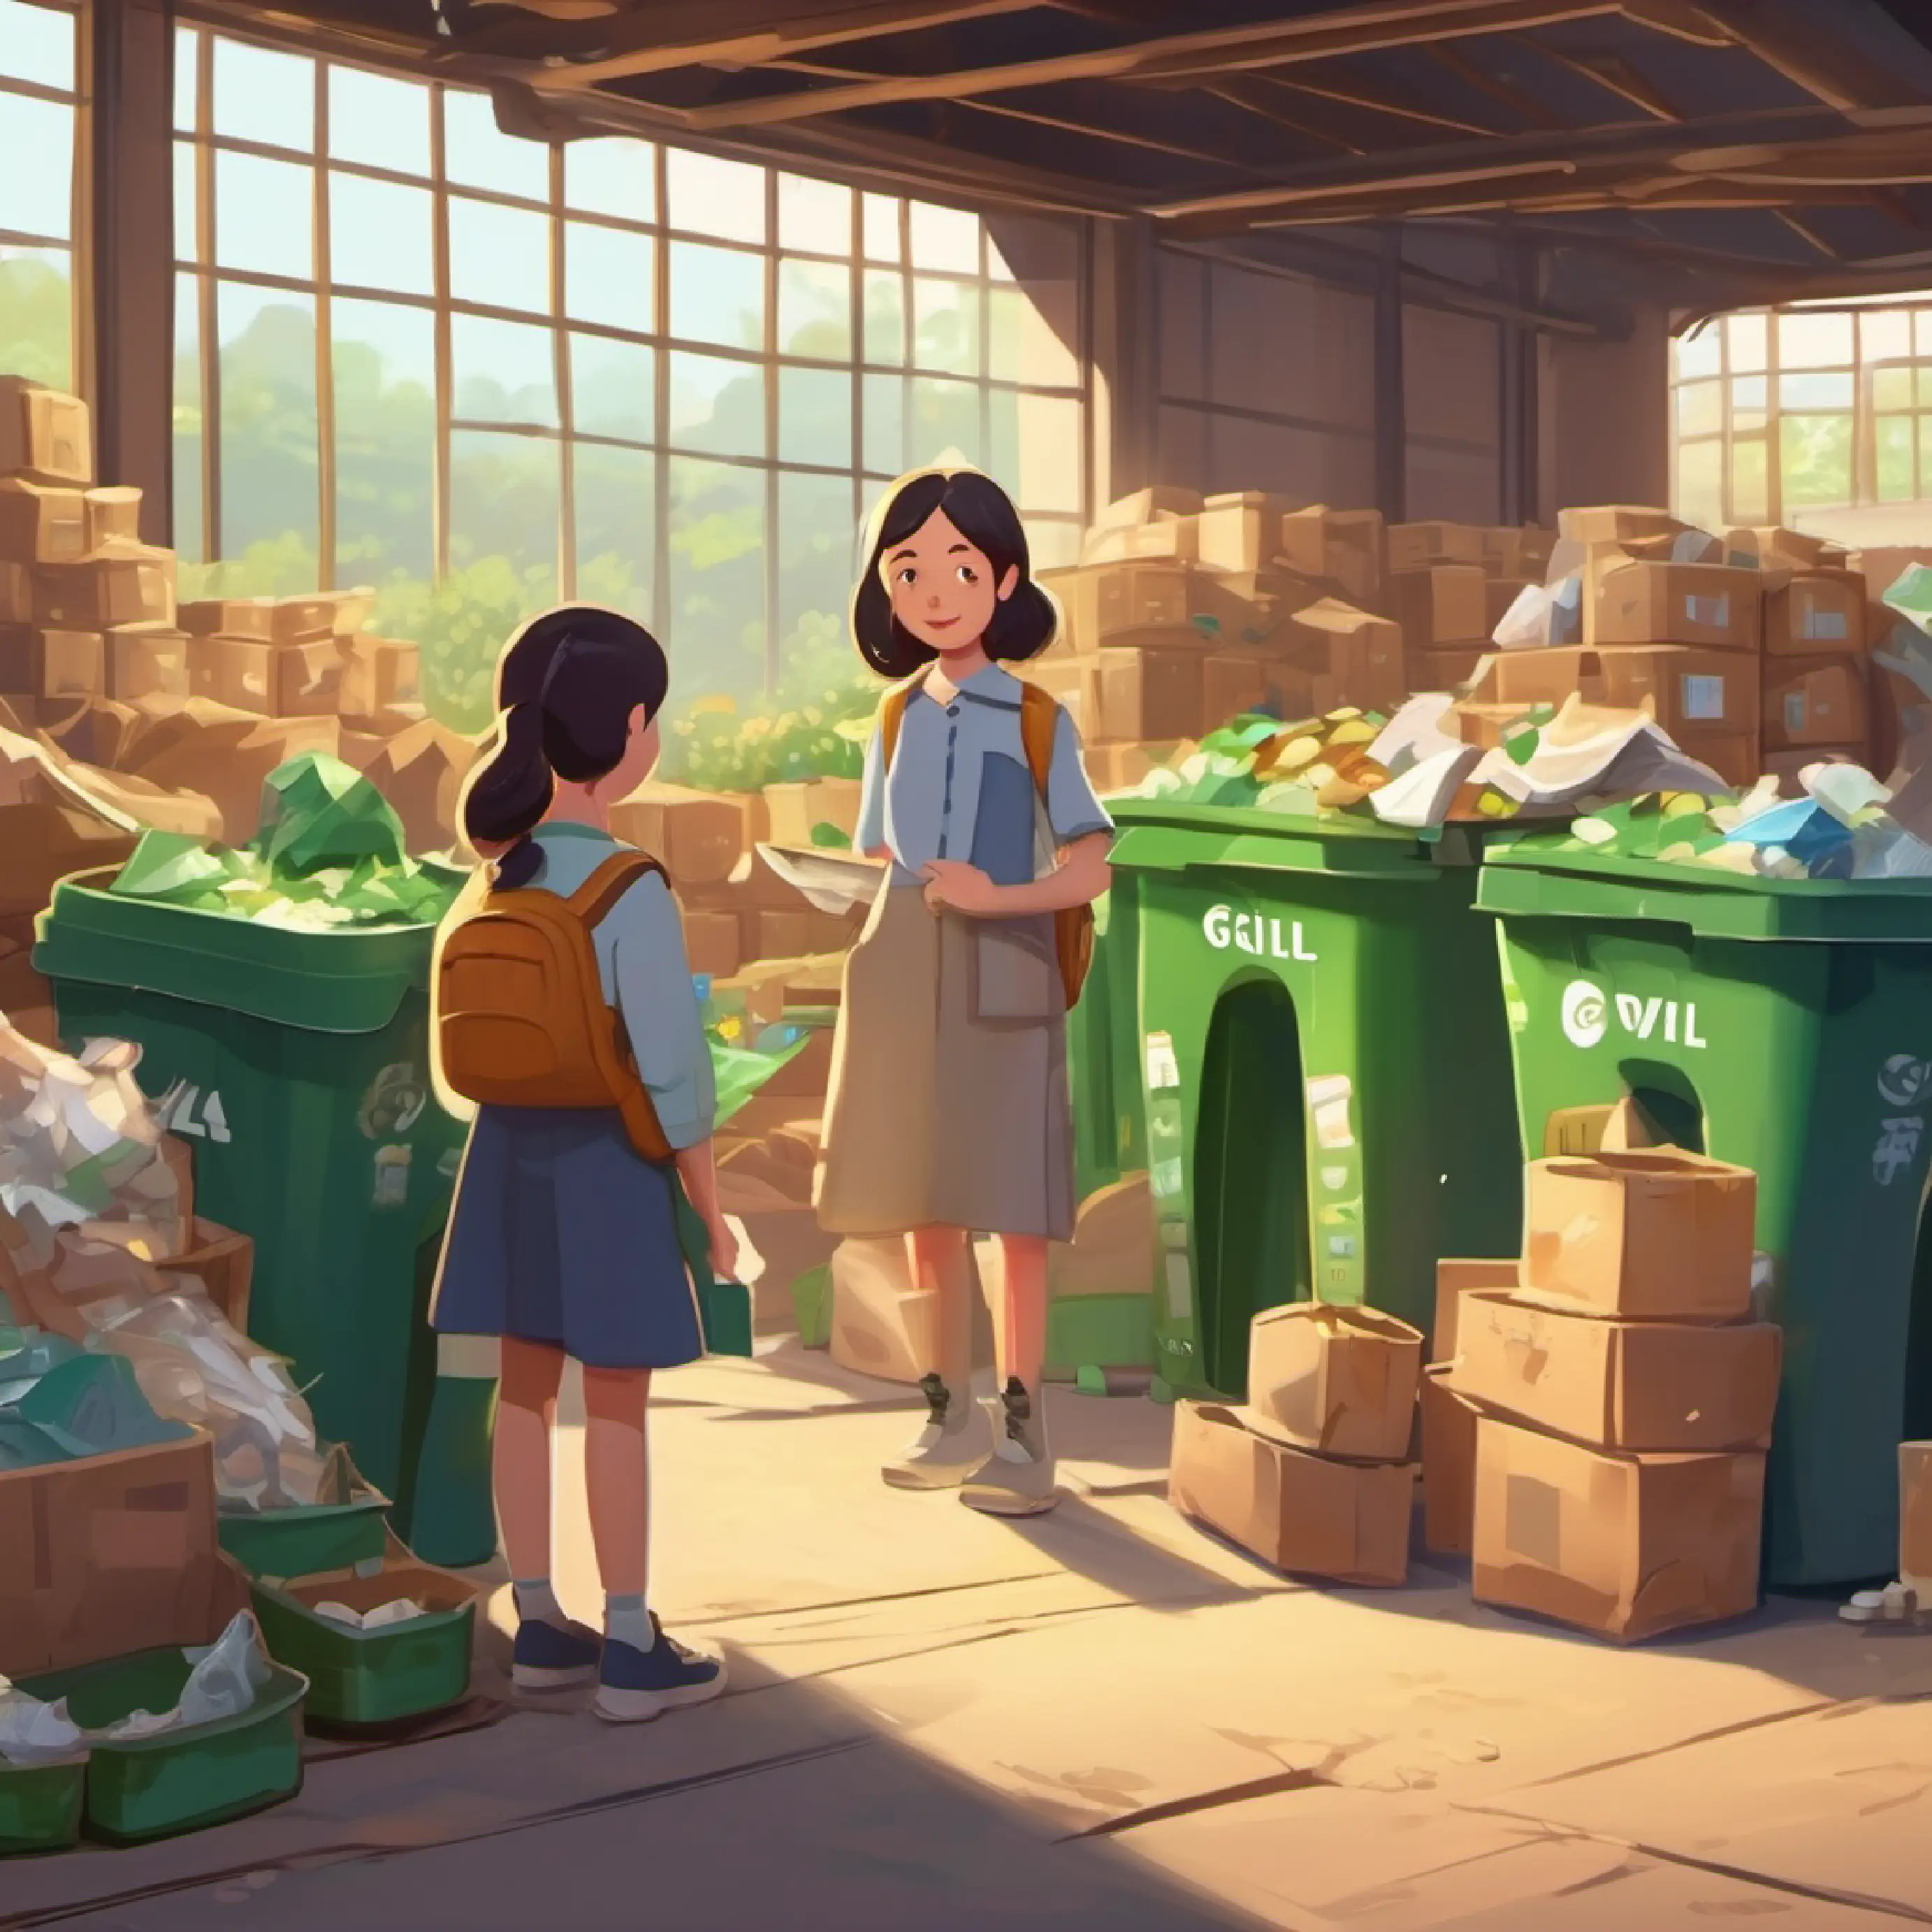 Lily visits a recycling center with her class and shares her new knowledge with family.